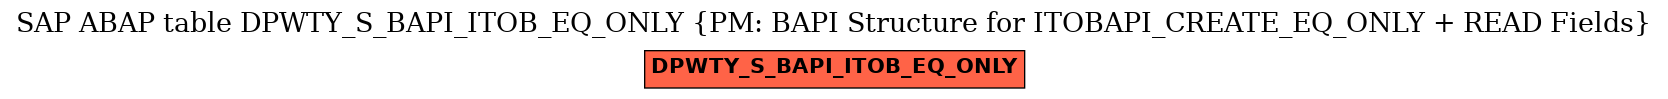 E-R Diagram for table DPWTY_S_BAPI_ITOB_EQ_ONLY (PM: BAPI Structure for ITOBAPI_CREATE_EQ_ONLY + READ Fields)